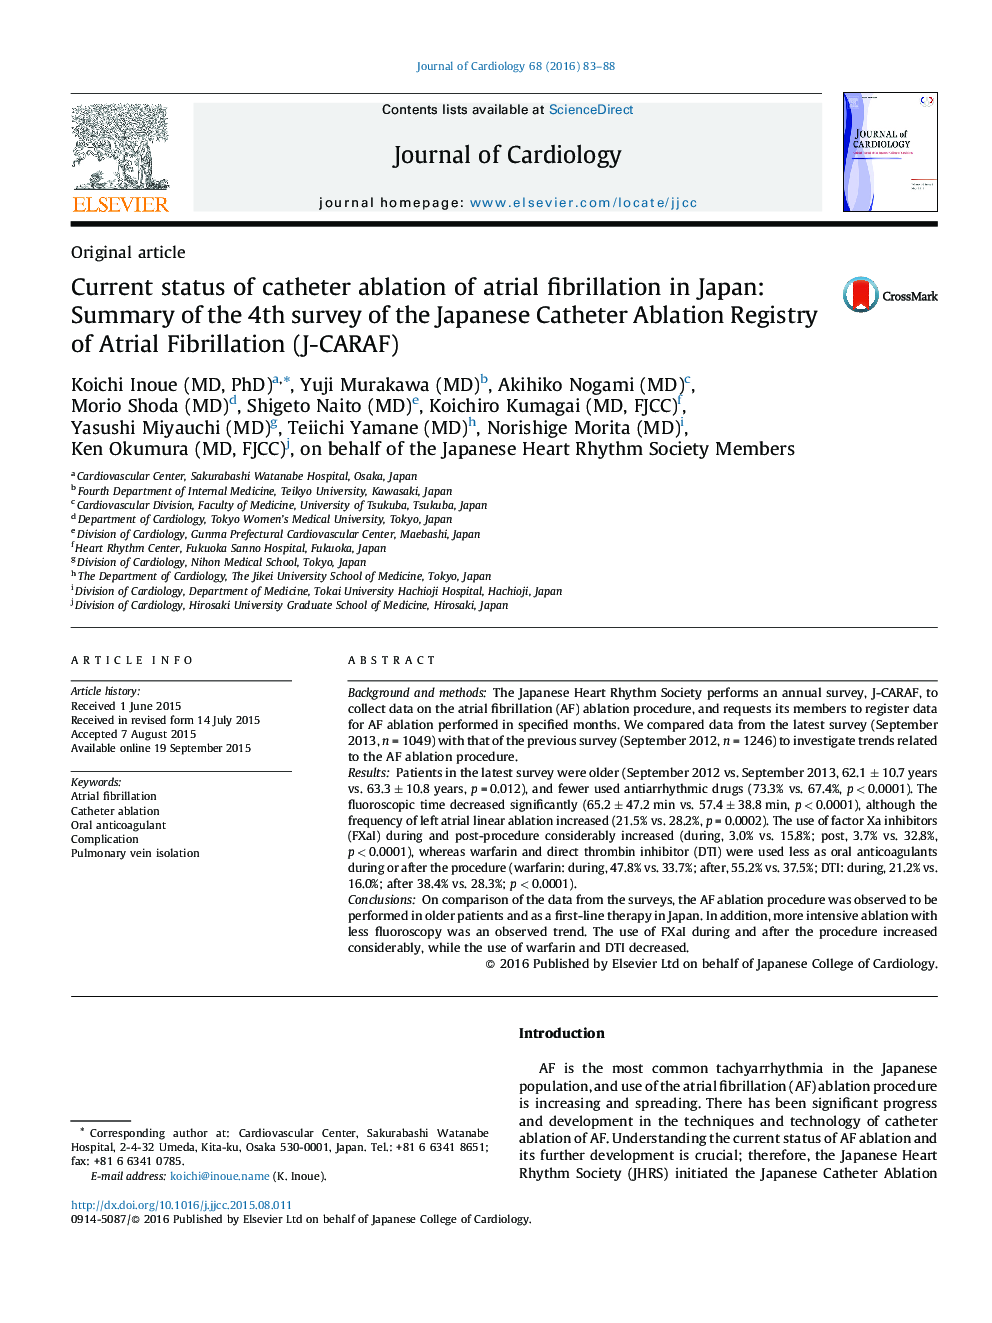 Current status of catheter ablation of atrial fibrillation in Japan: Summary of the 4th survey of the Japanese Catheter Ablation Registry of Atrial Fibrillation (J-CARAF)